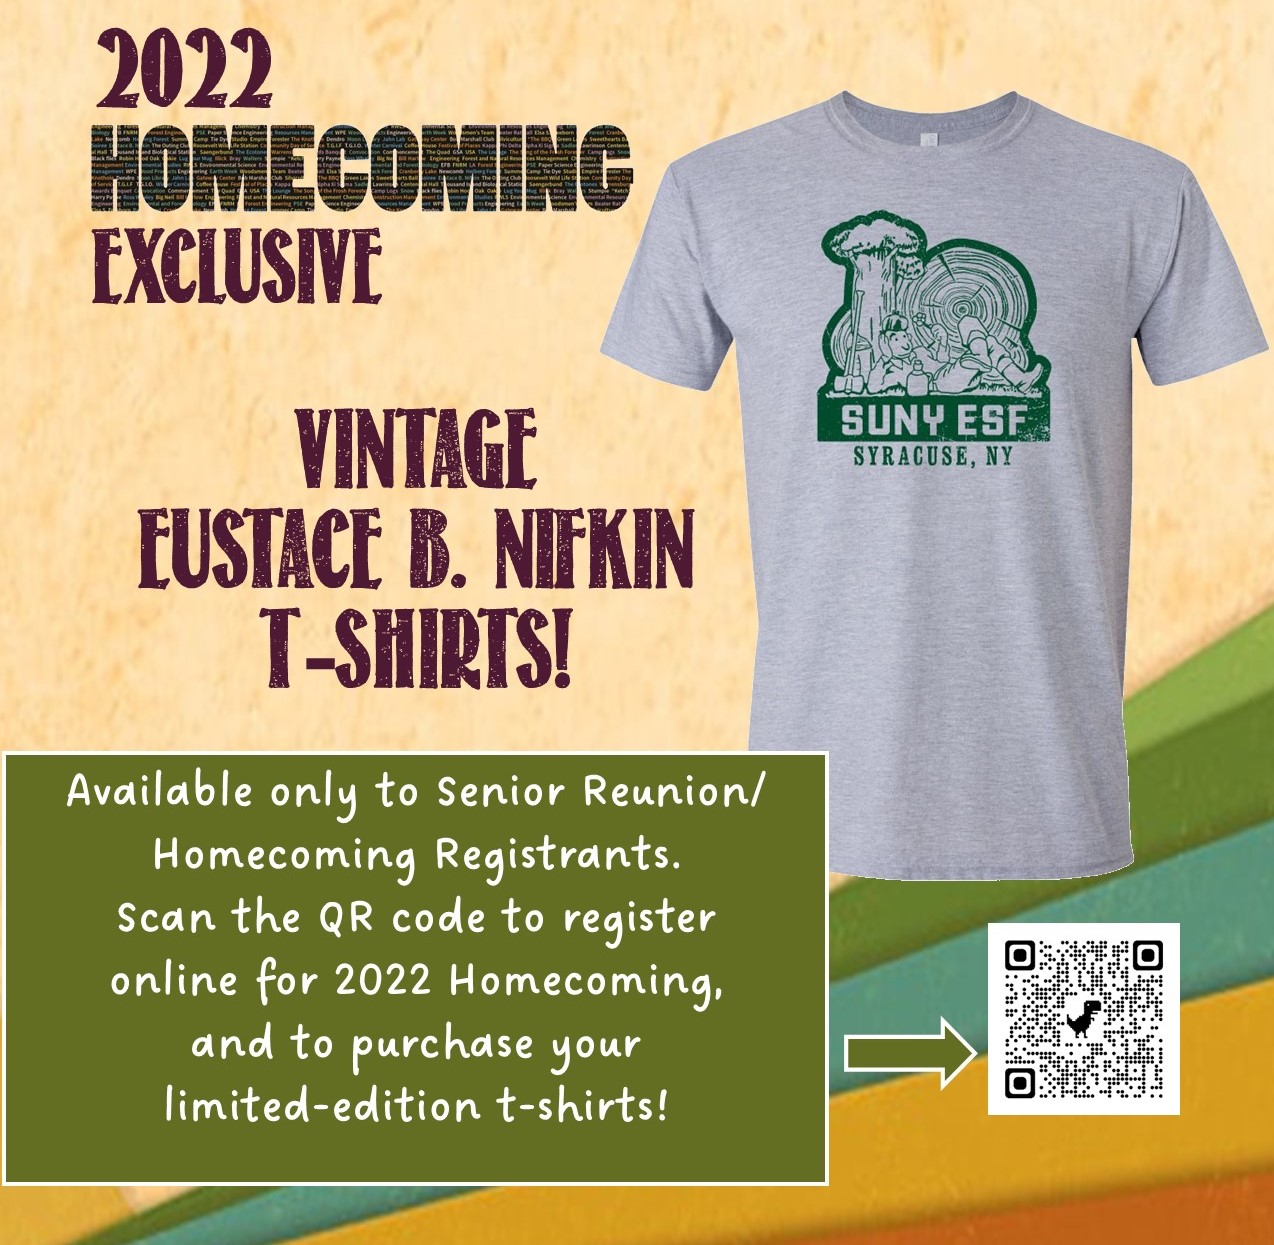 Poster for 2022 homecoming weekend advertising vintage Eustace Nifkin t-shirts